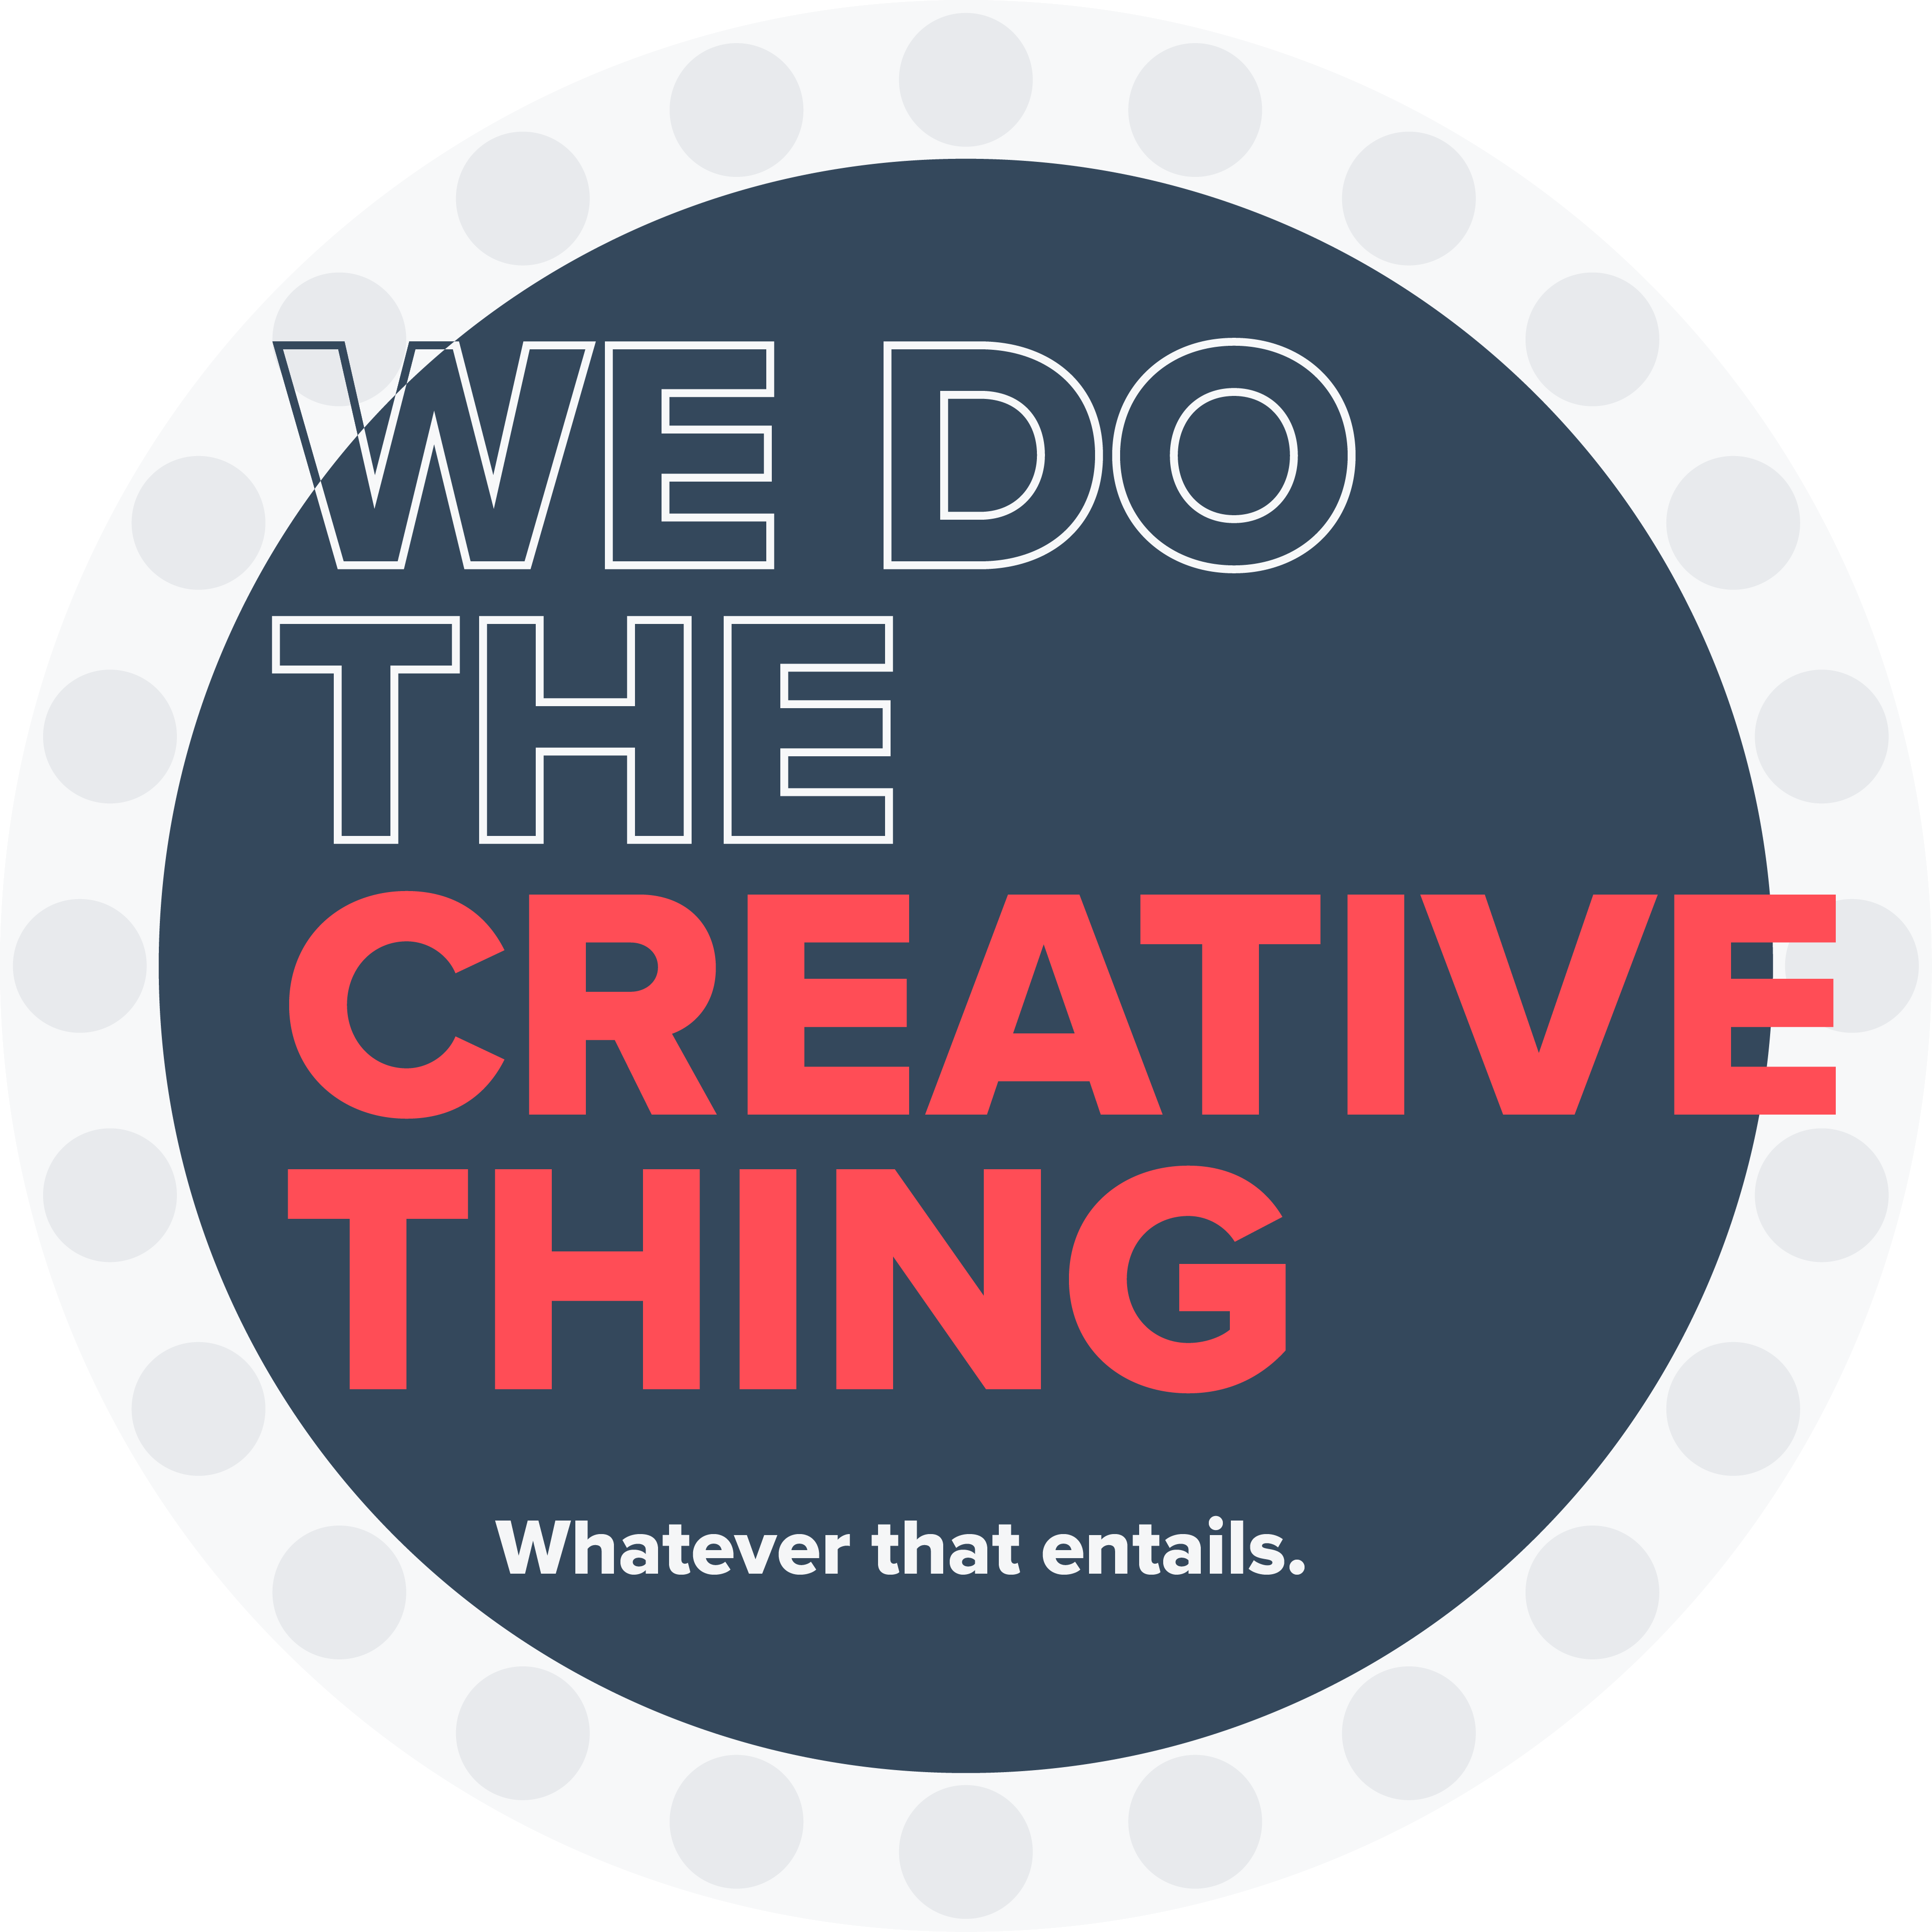 https://213255.fs1.hubspotusercontent-na1.net/hubfs/213255/we%20do%20the%20creative%20thing%20v1.png